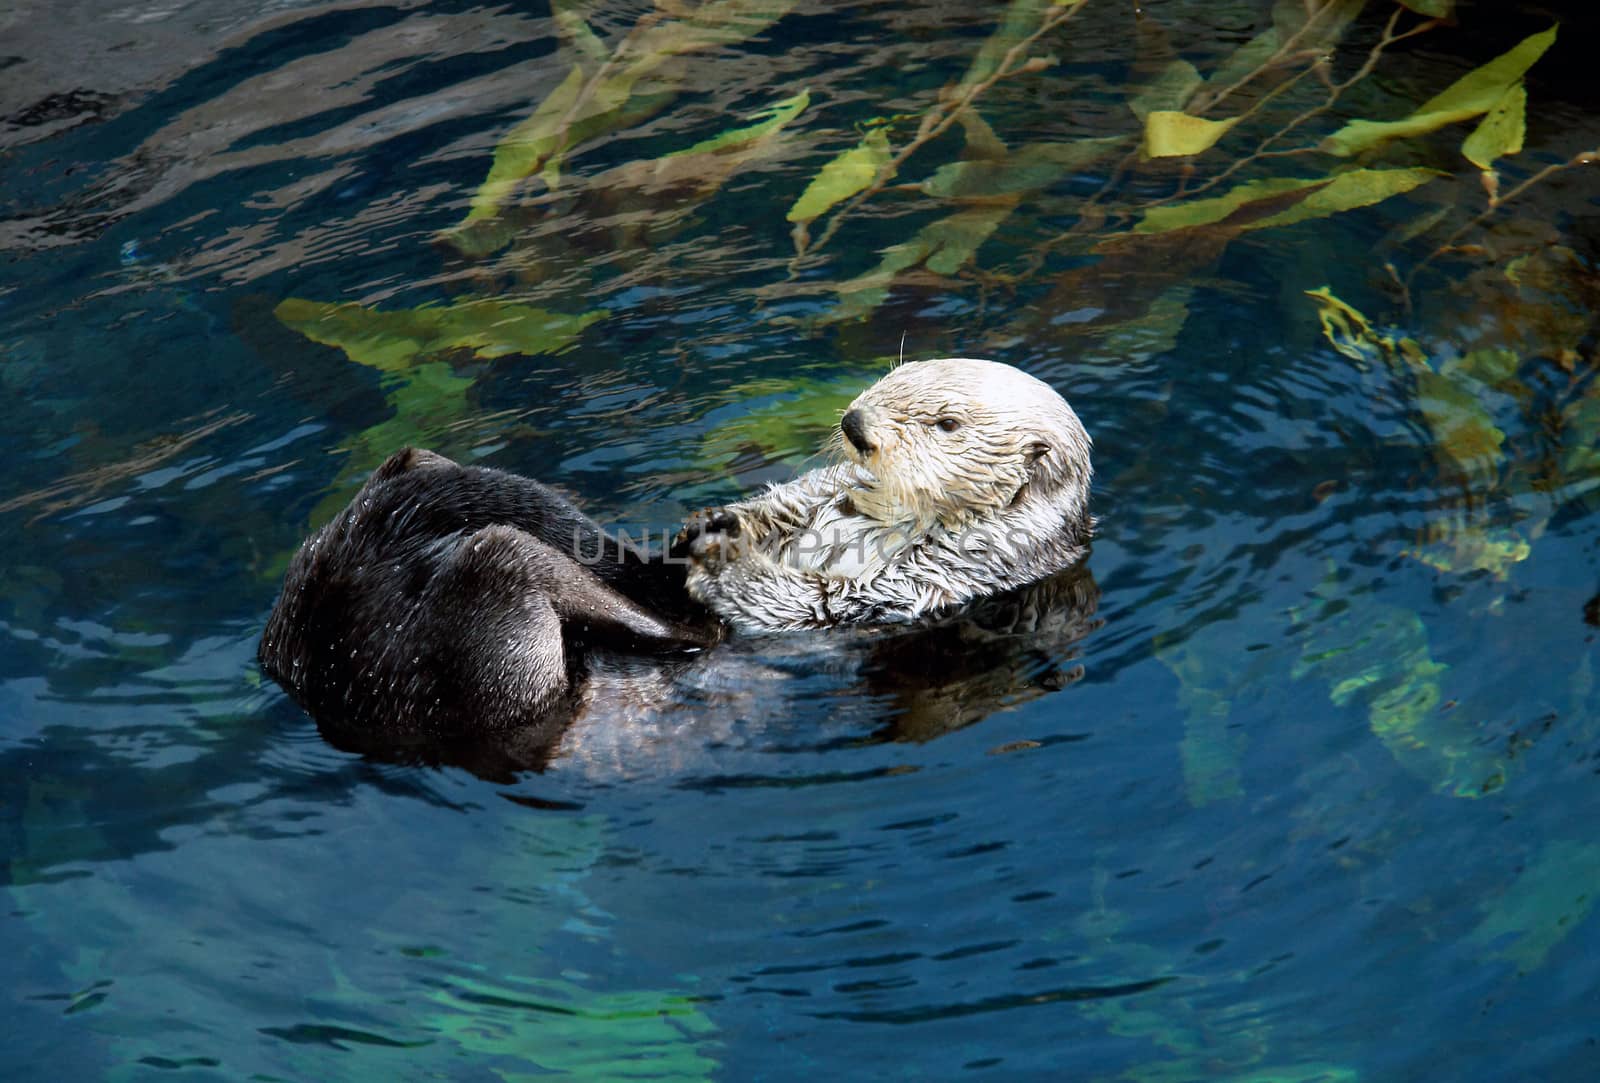 Sea otter (Scientiphic name: Enhydra lutris)                     by ptxgarfield